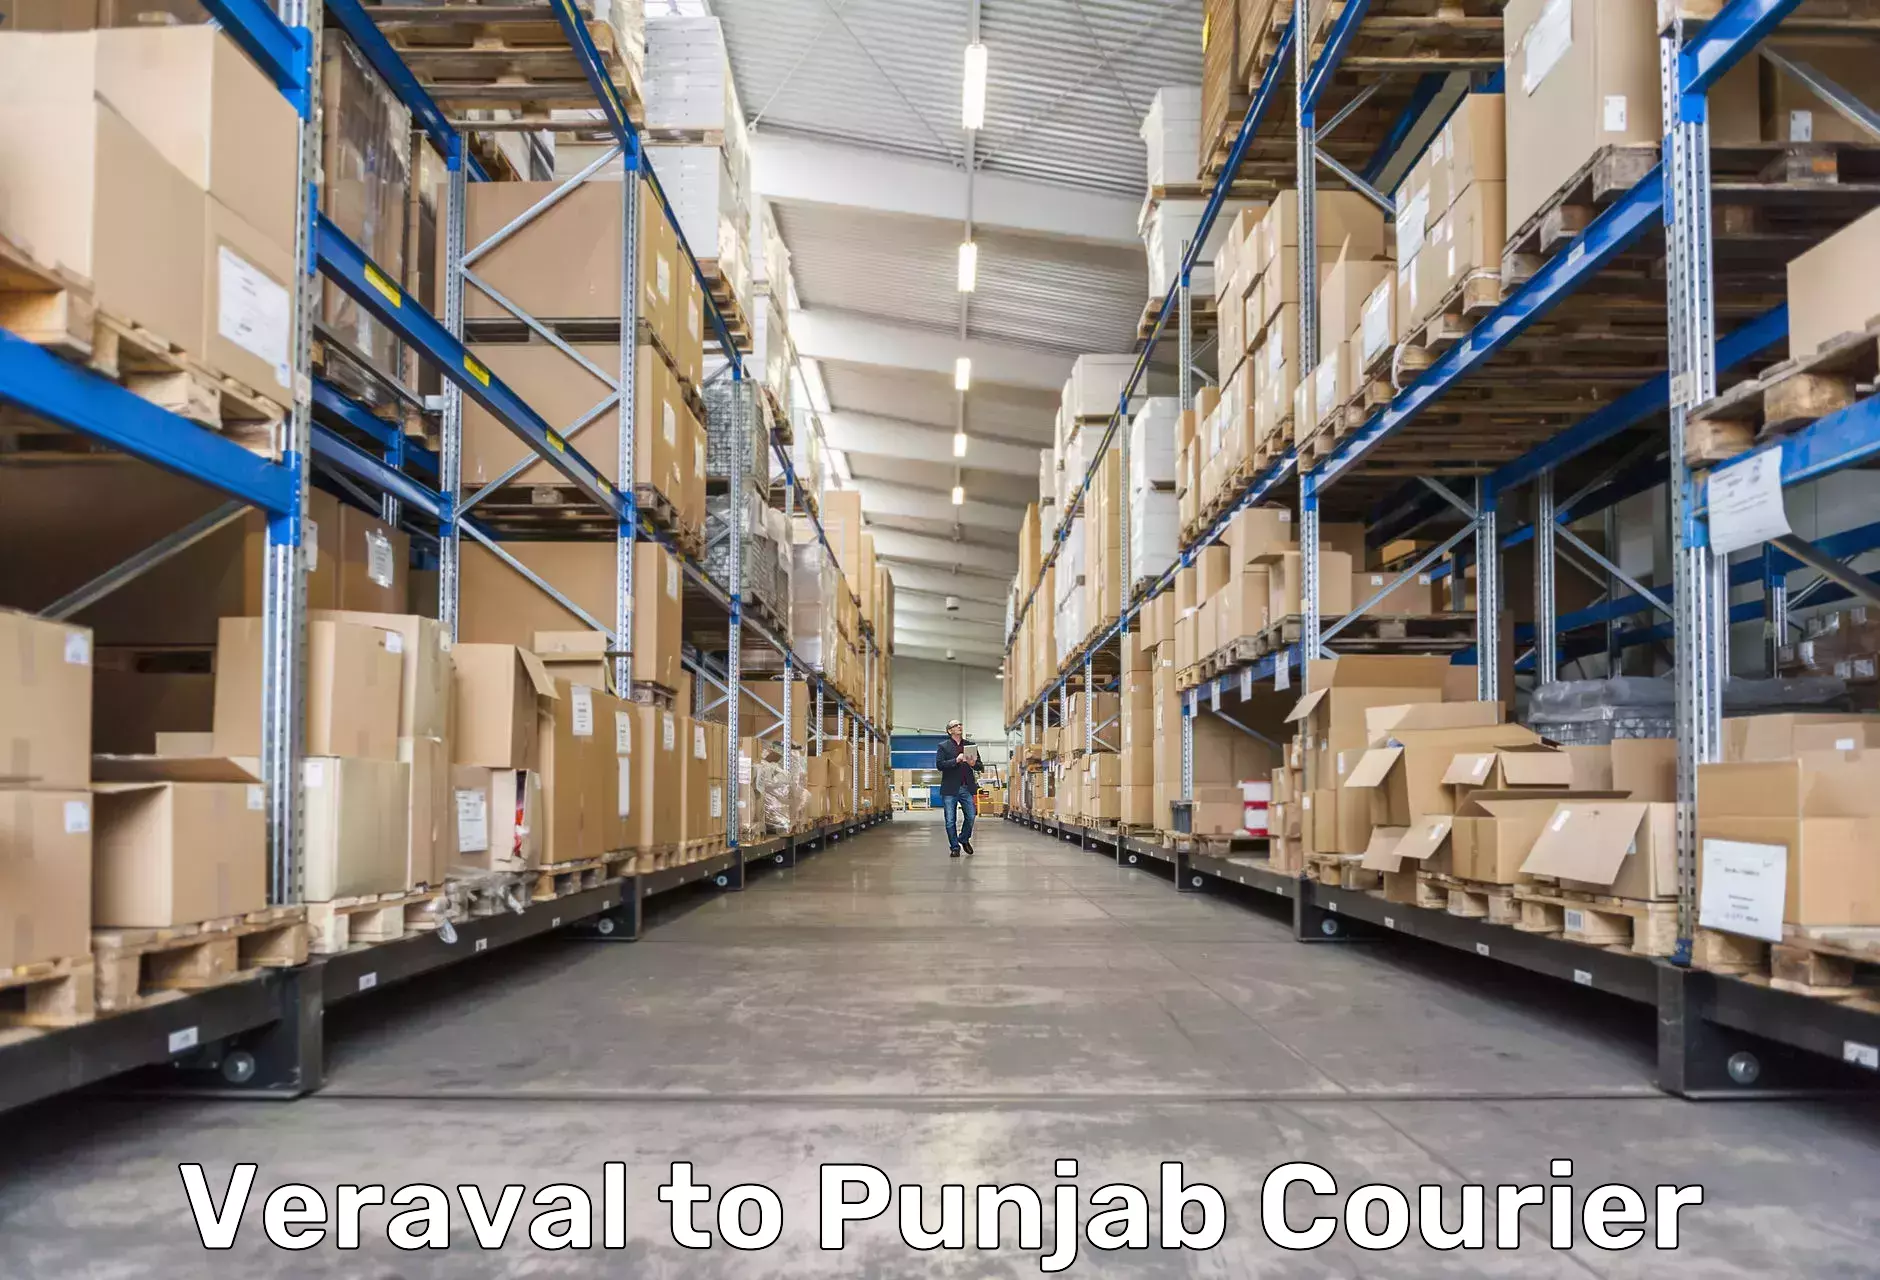 Full-service courier options Veraval to Punjab